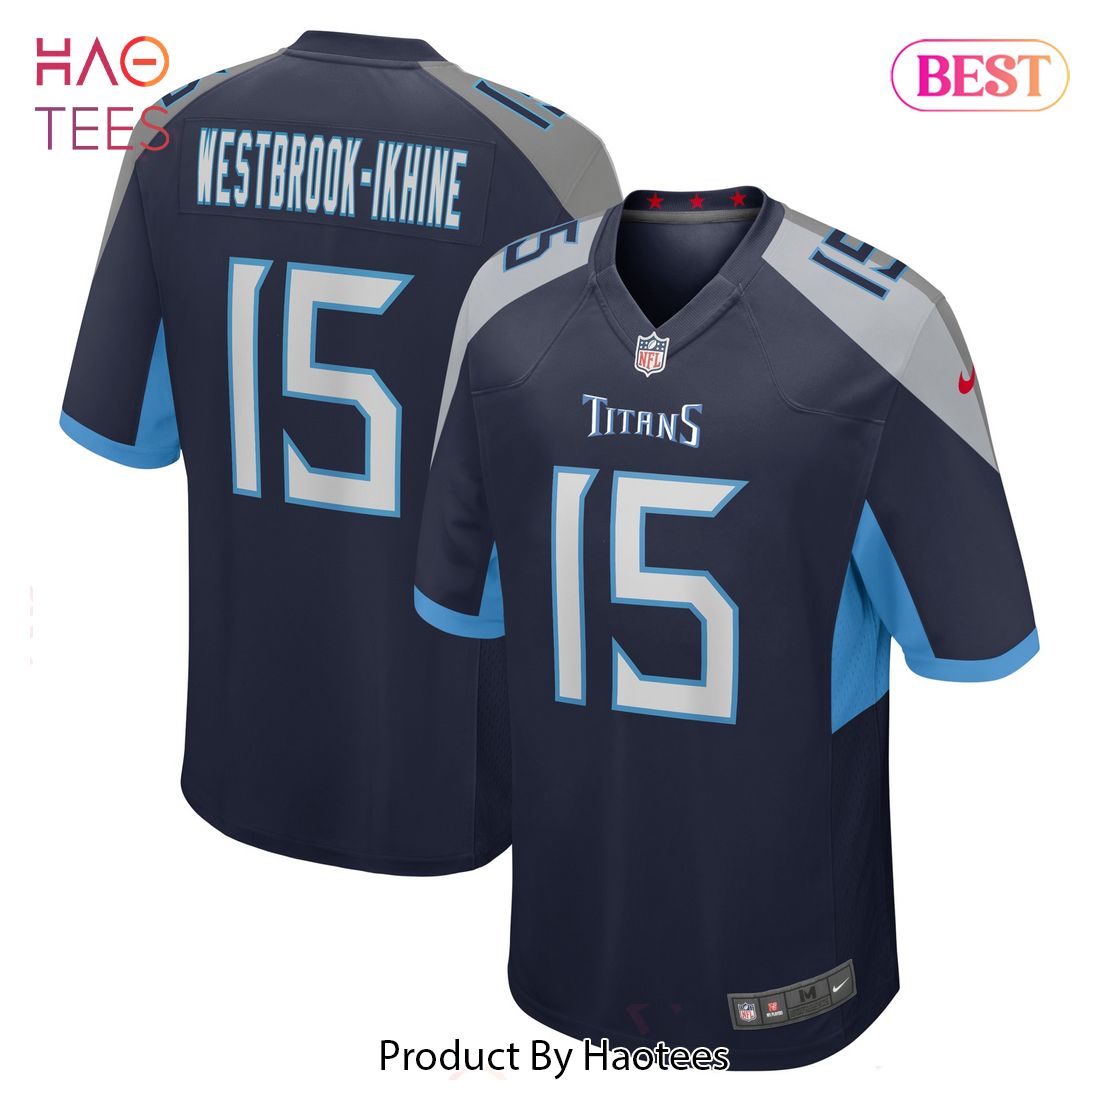 Nick Westbrook-Ikhine Tennessee Titans Nike Game Player Jersey Navy